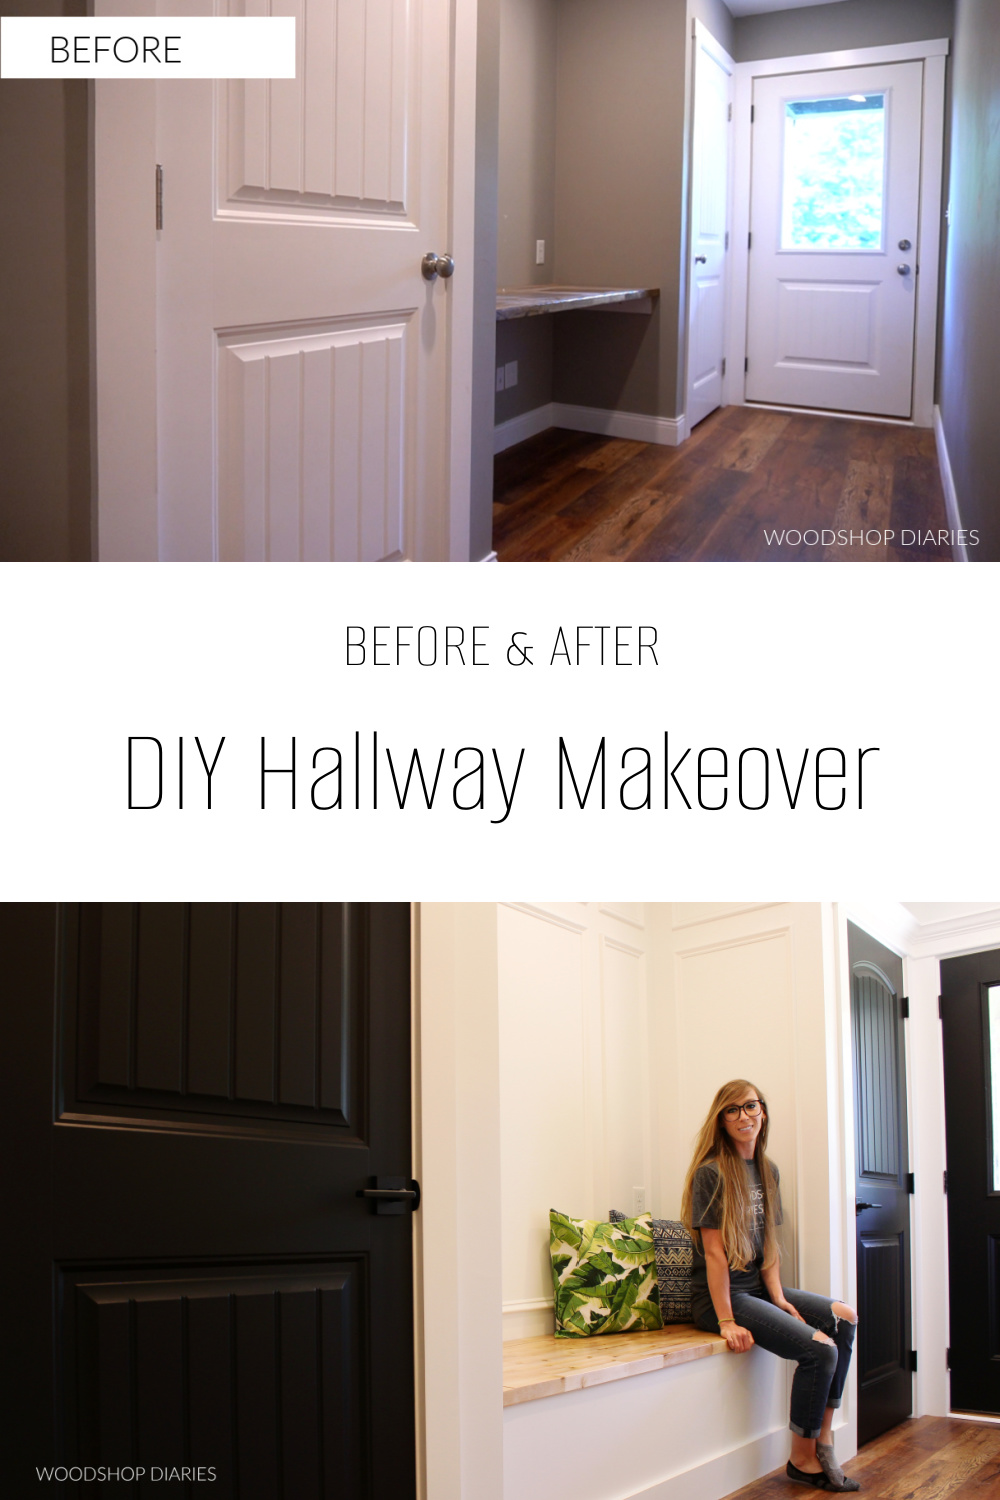 Pinterest collage image showing hallway before image at top and DIY hallway makeover after image at bottom with text "BEFORE AND AFTER DIY Hallway makeover"